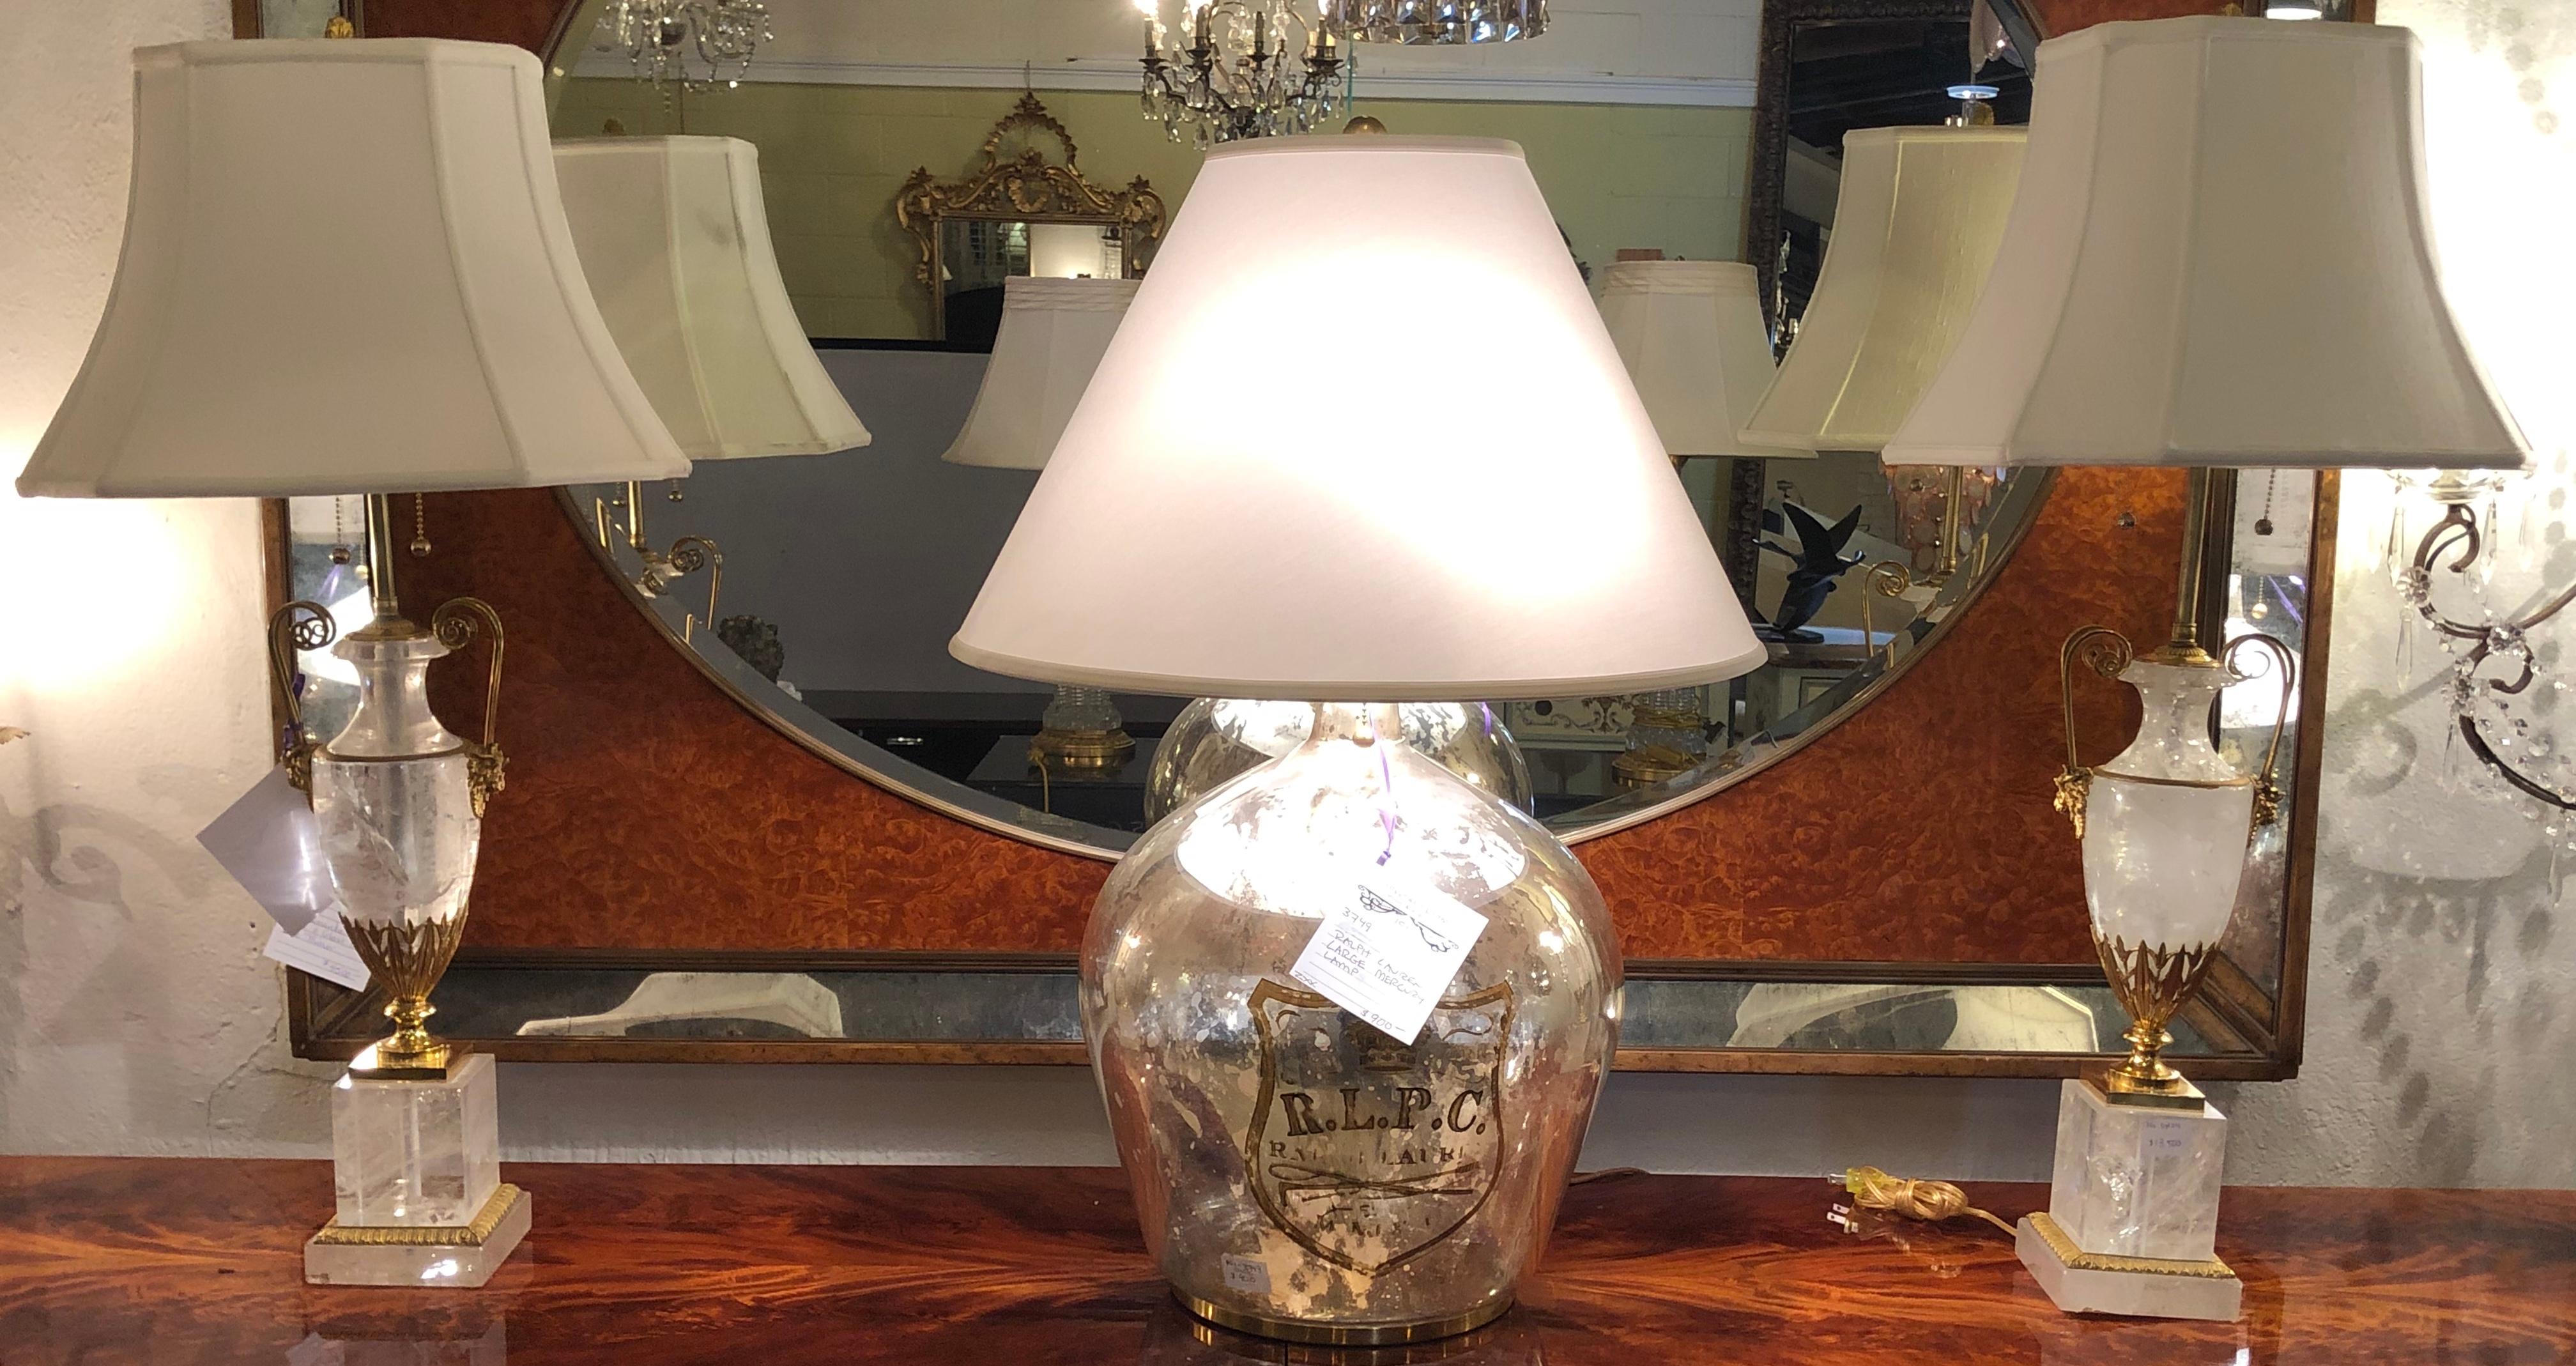 Pair of very large gilt gold and rock crystal urn form table lamps with custom shades. A pair of ormolu mounted rock crystal table lamps with scrolled horned lions mark handles and stepped square bases. A very similar pair of half this size sold in